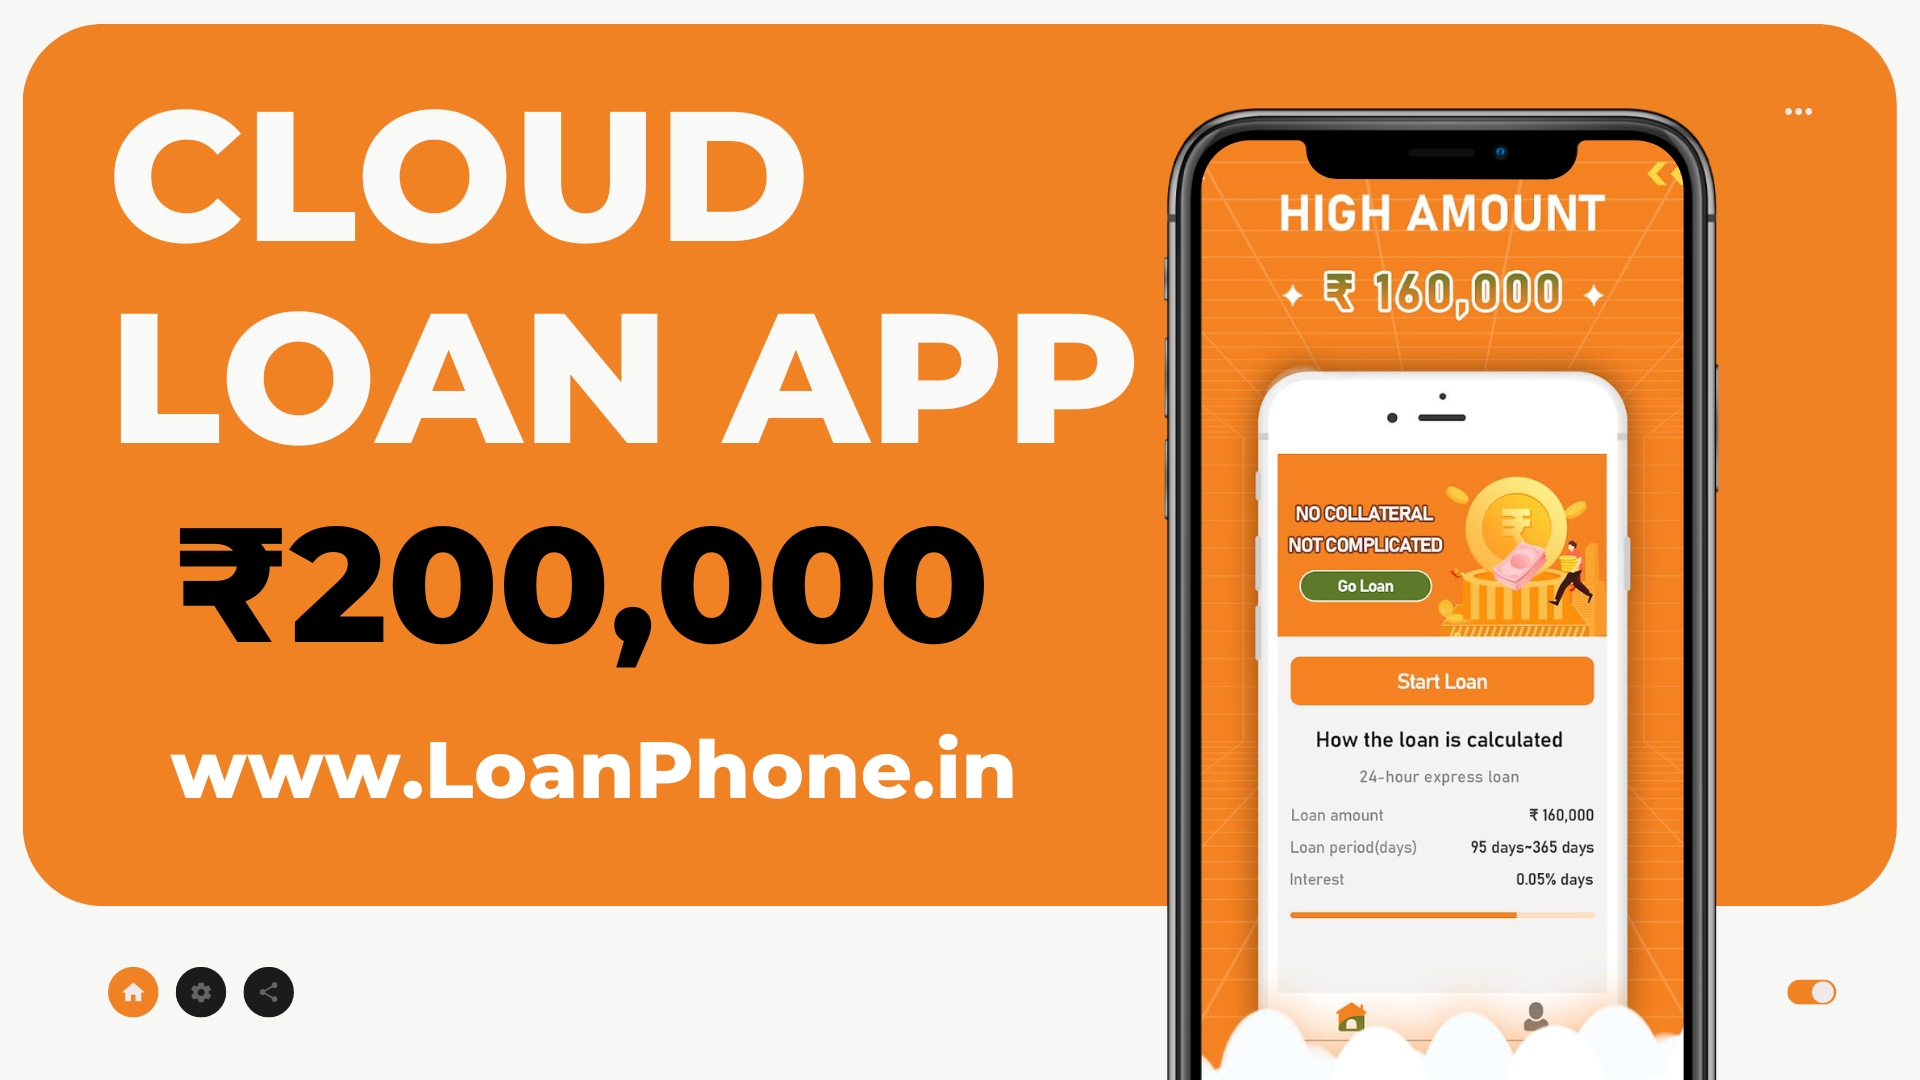 How much loan can be availed from Cloud Loan App?